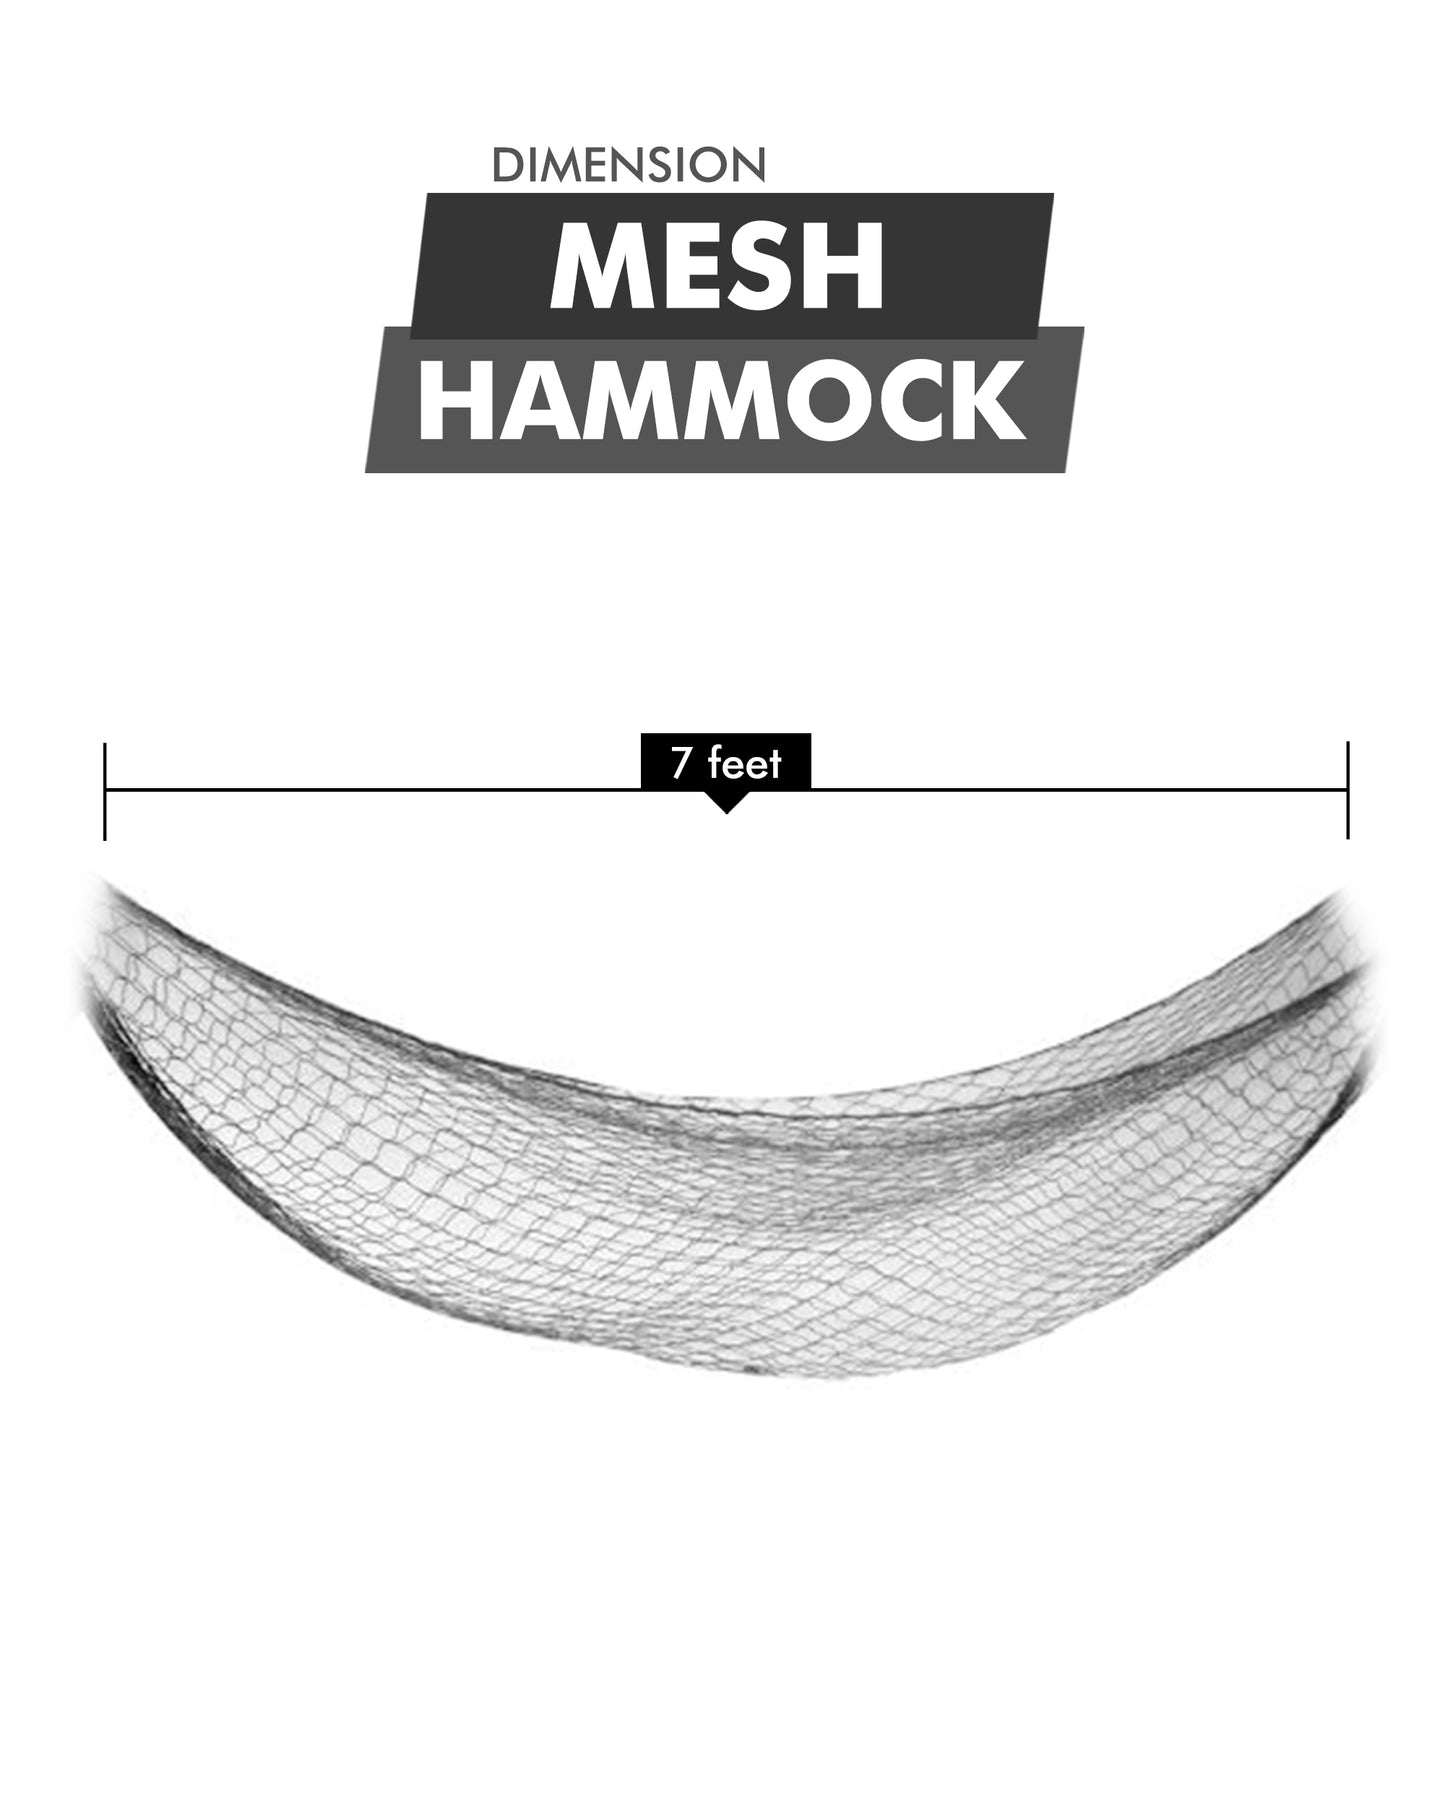 7ft Nylon Hammock - Portable and Easy to Set Up - Holds up to 220LBs